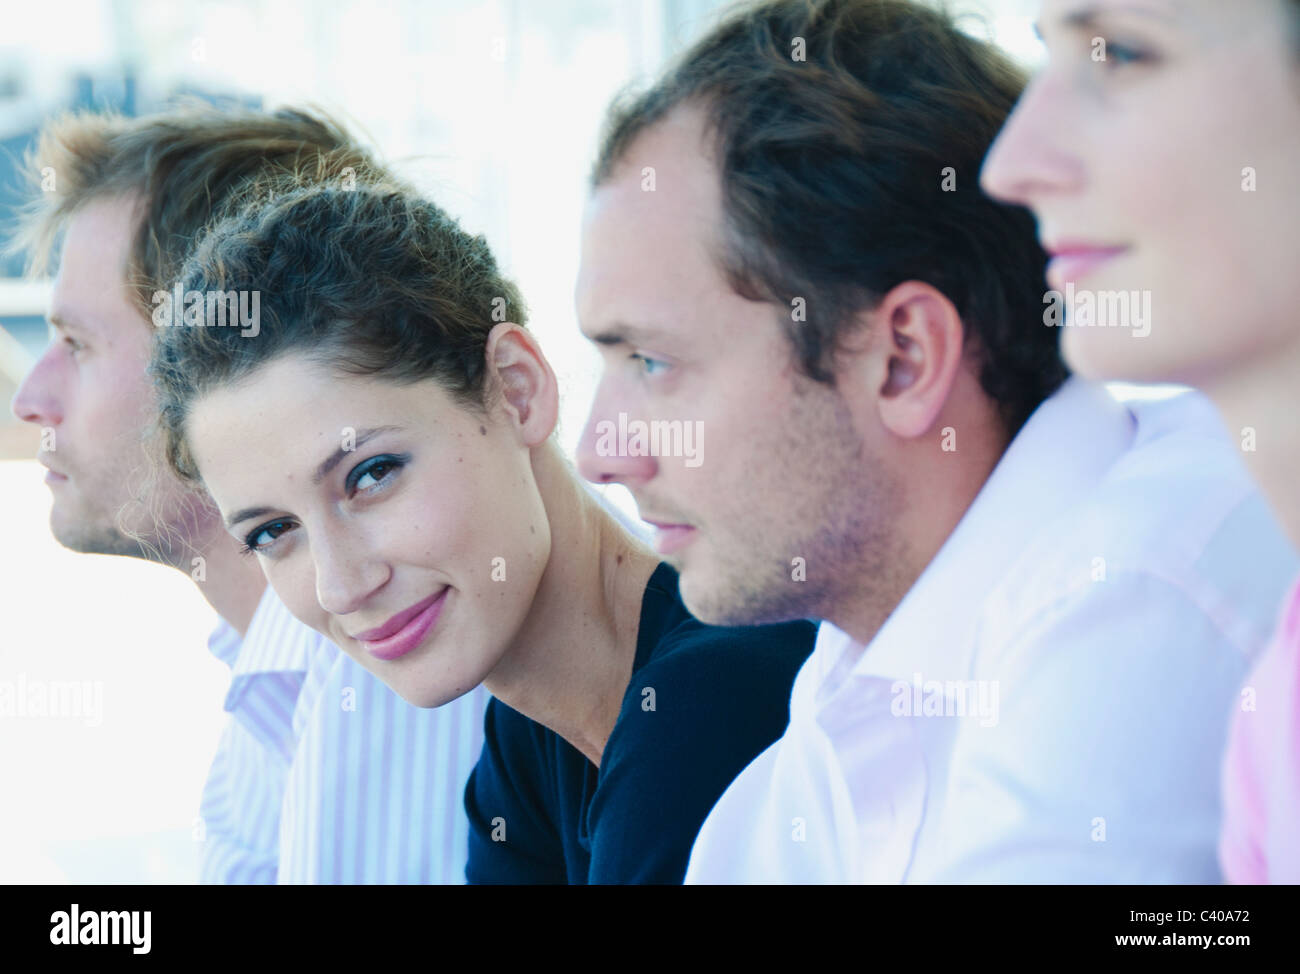 Portrait of woman in line up Stock Photo